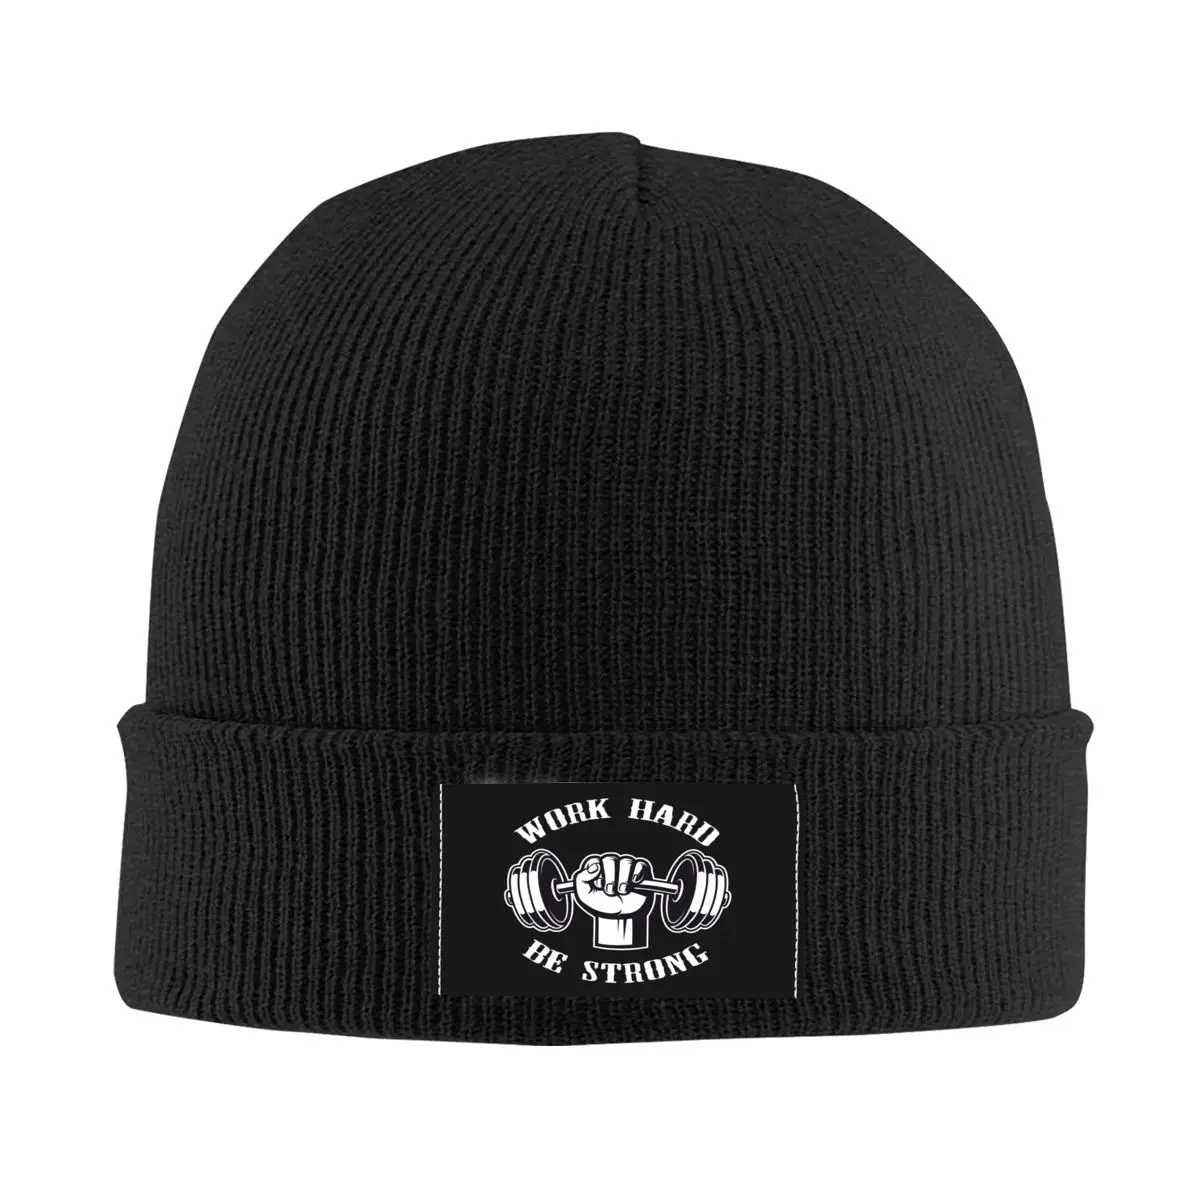 

Work Hard Be Strong Gym Motivational Quote Bonnet Hats Street Knitted Hat Warm Winter Bodybuilding Workout Skullies Beanies Caps